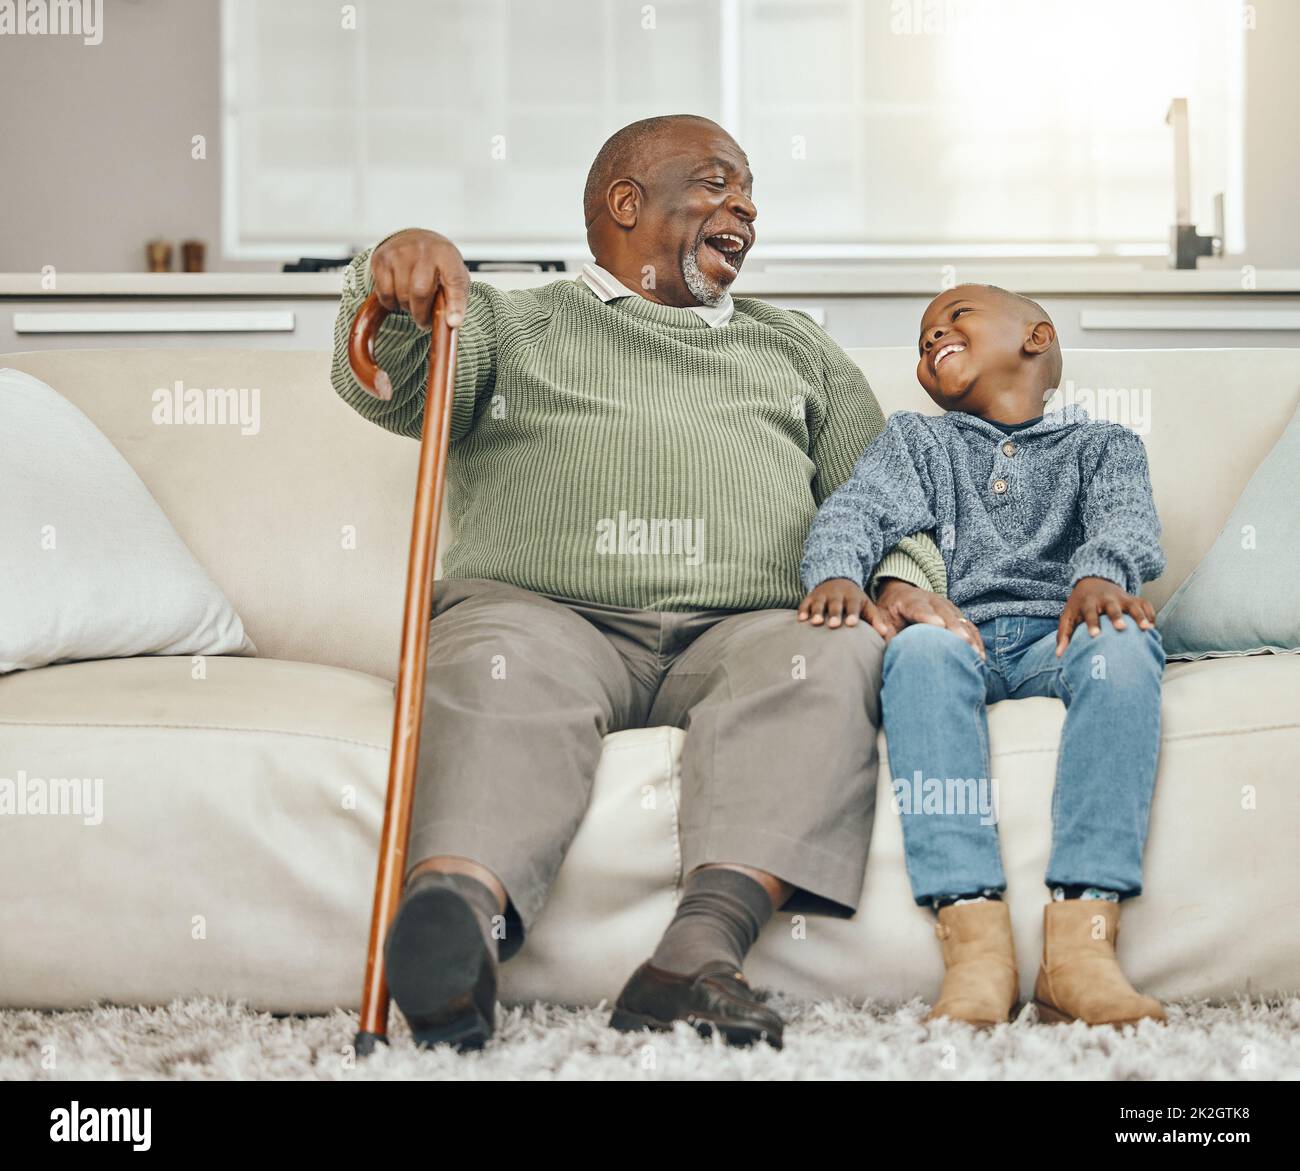 My grandpas the coolest. Shot of a grandfather bonding with his young grandson on a sofa at home. Stock Photo